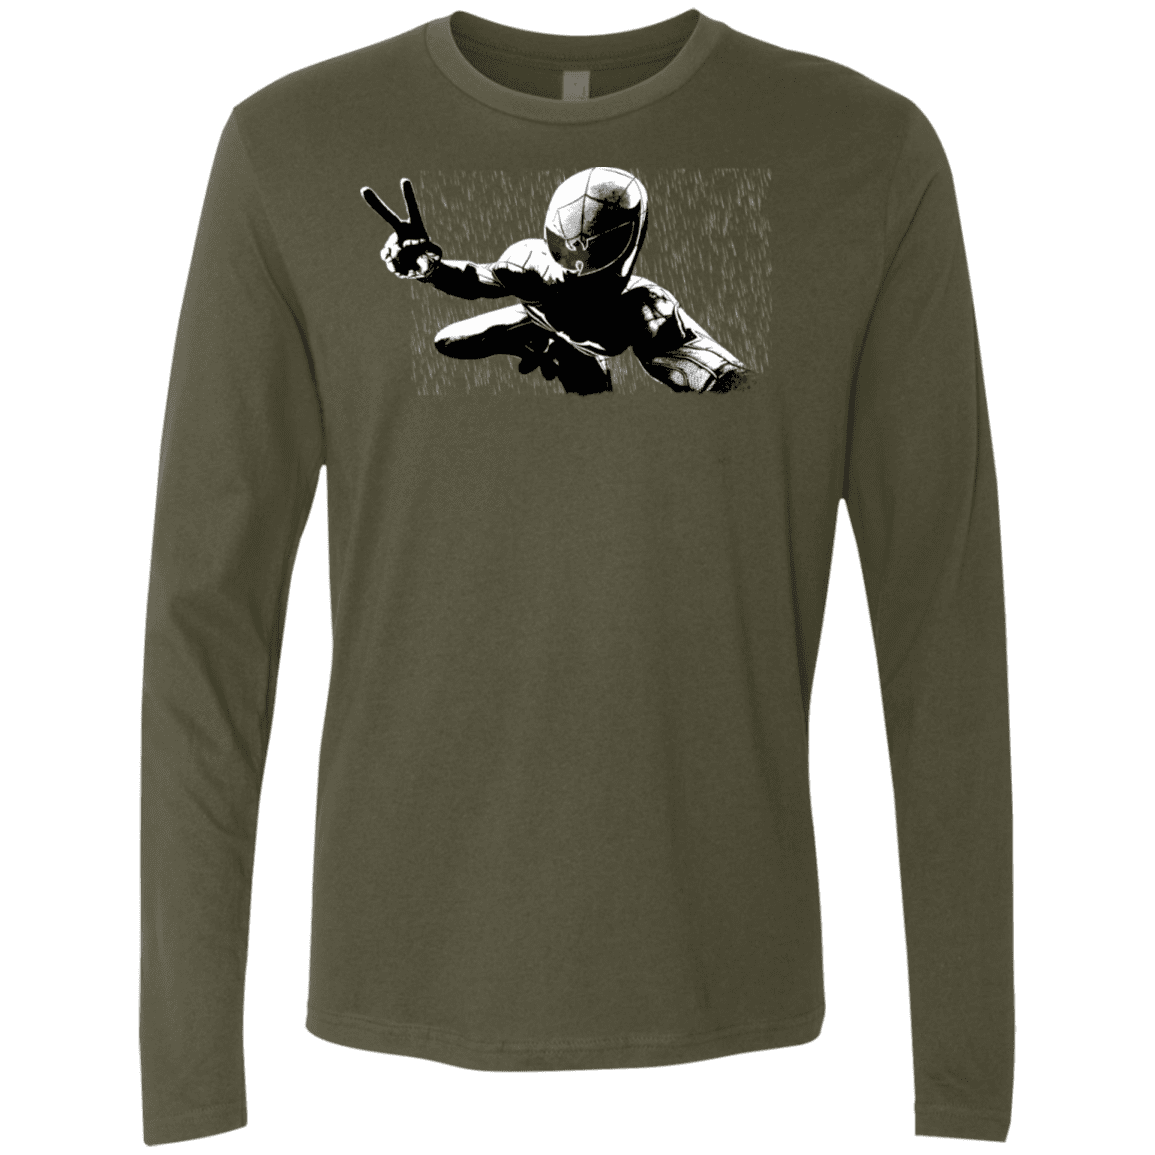 T-Shirts Military Green / S Its Yourz Men's Premium Long Sleeve